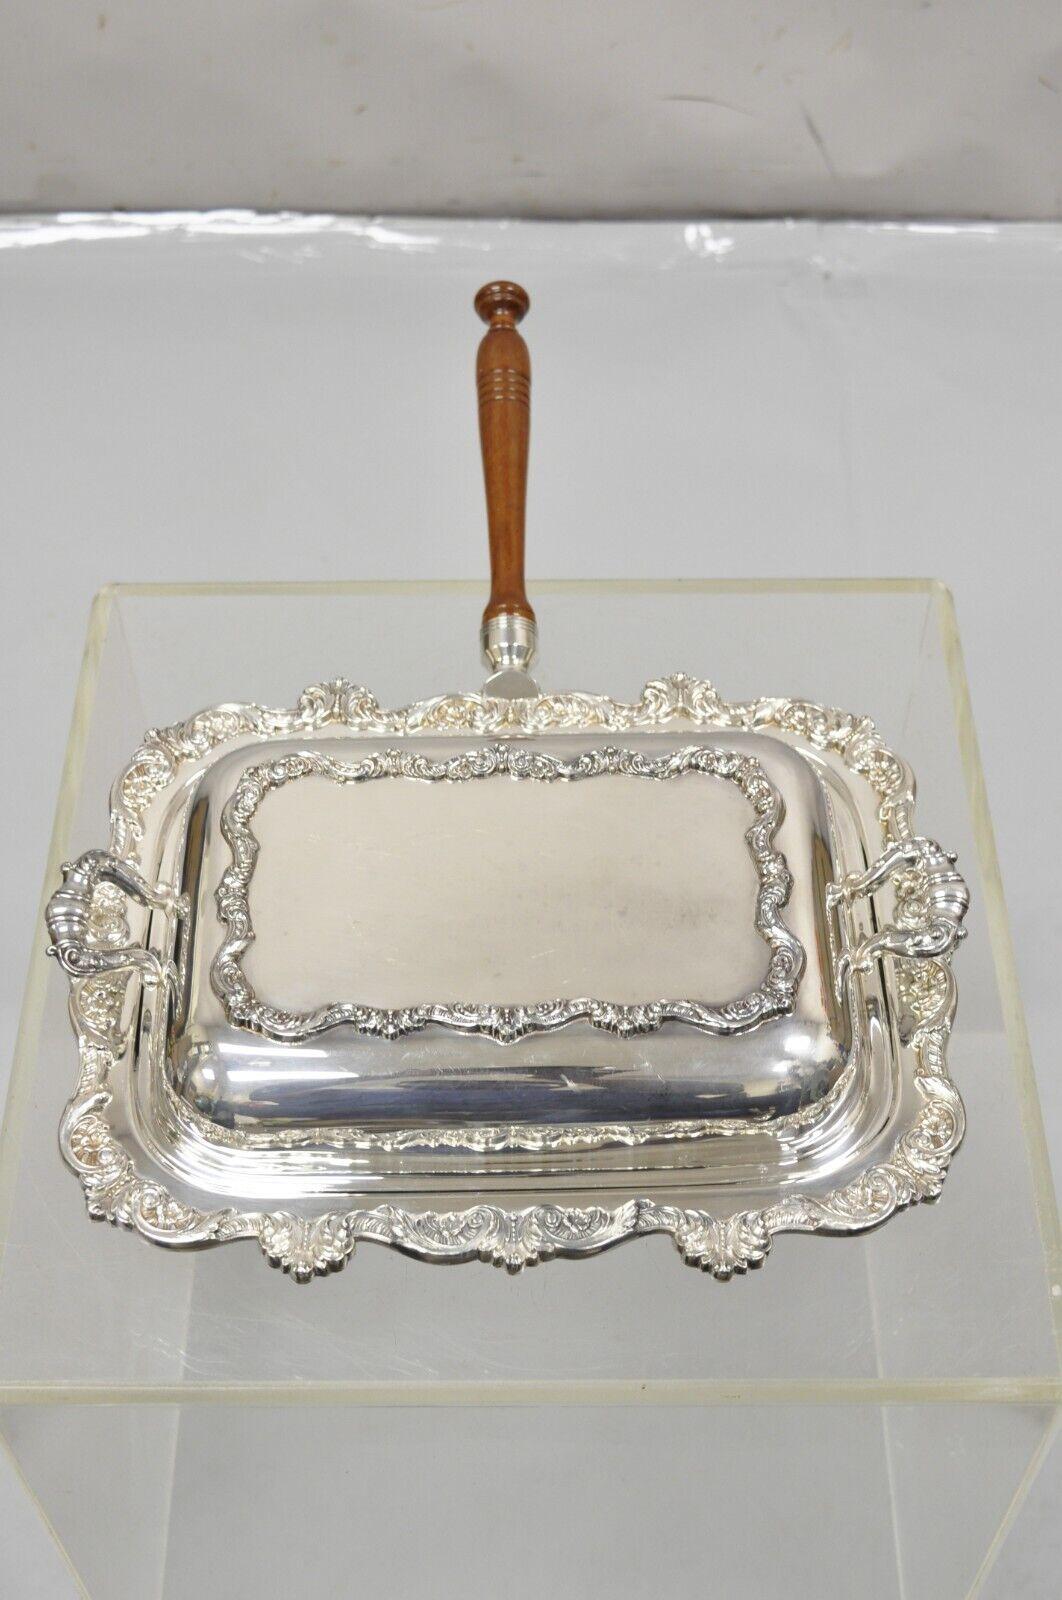 Vintage Poole Silver Co Victorian Style Silver Plated Lidded Serving Platter with Wooden Handle. Item features a removable wooden handle, ornate decoration, original hallmark. Circa Mid 20th Century. Measurements:  4